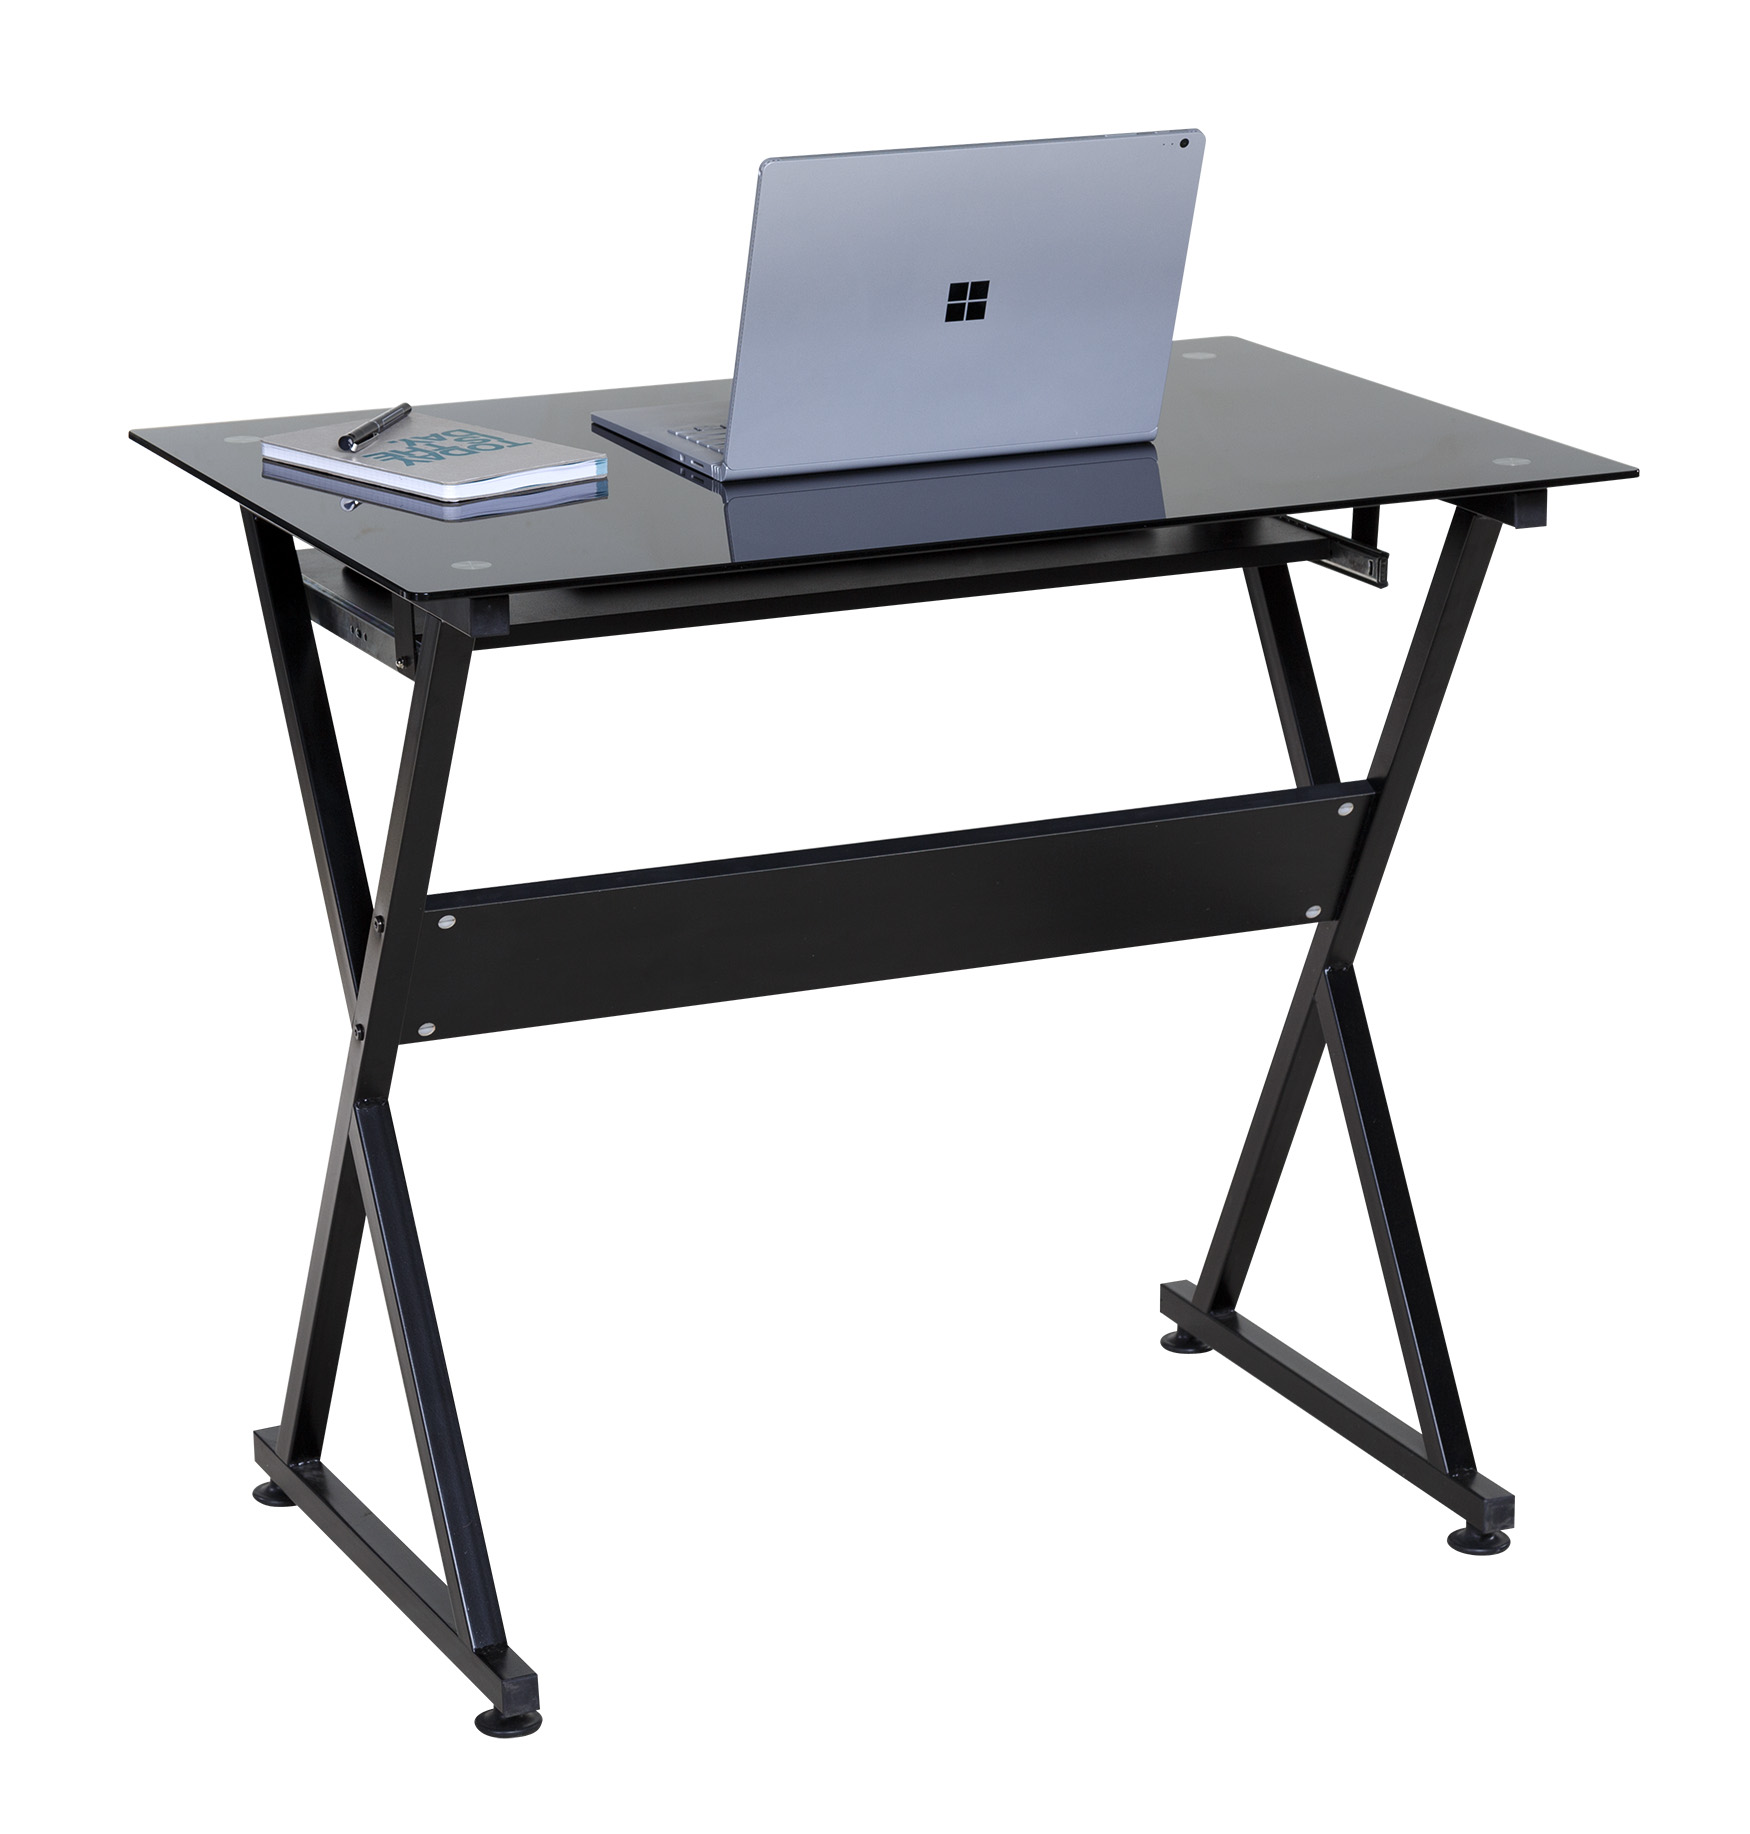 OneSpace 50-JN1205 Ultramodern Glass Computer Desk, with Pull-Out Keyboard Tray, Black - image 2 of 9